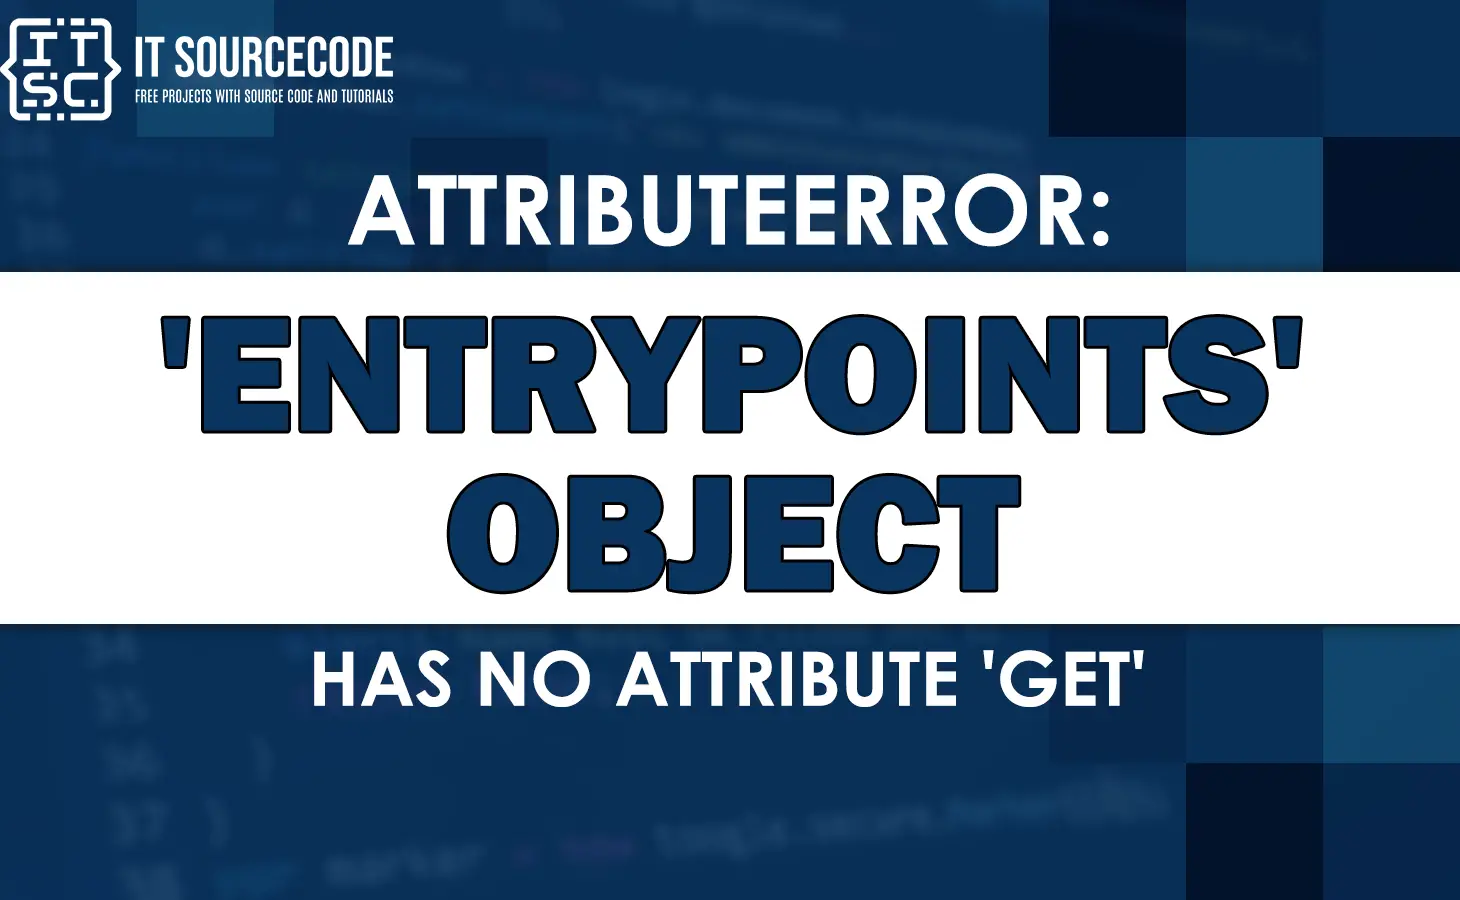 attributeerror: entrypoints object has no attribute get